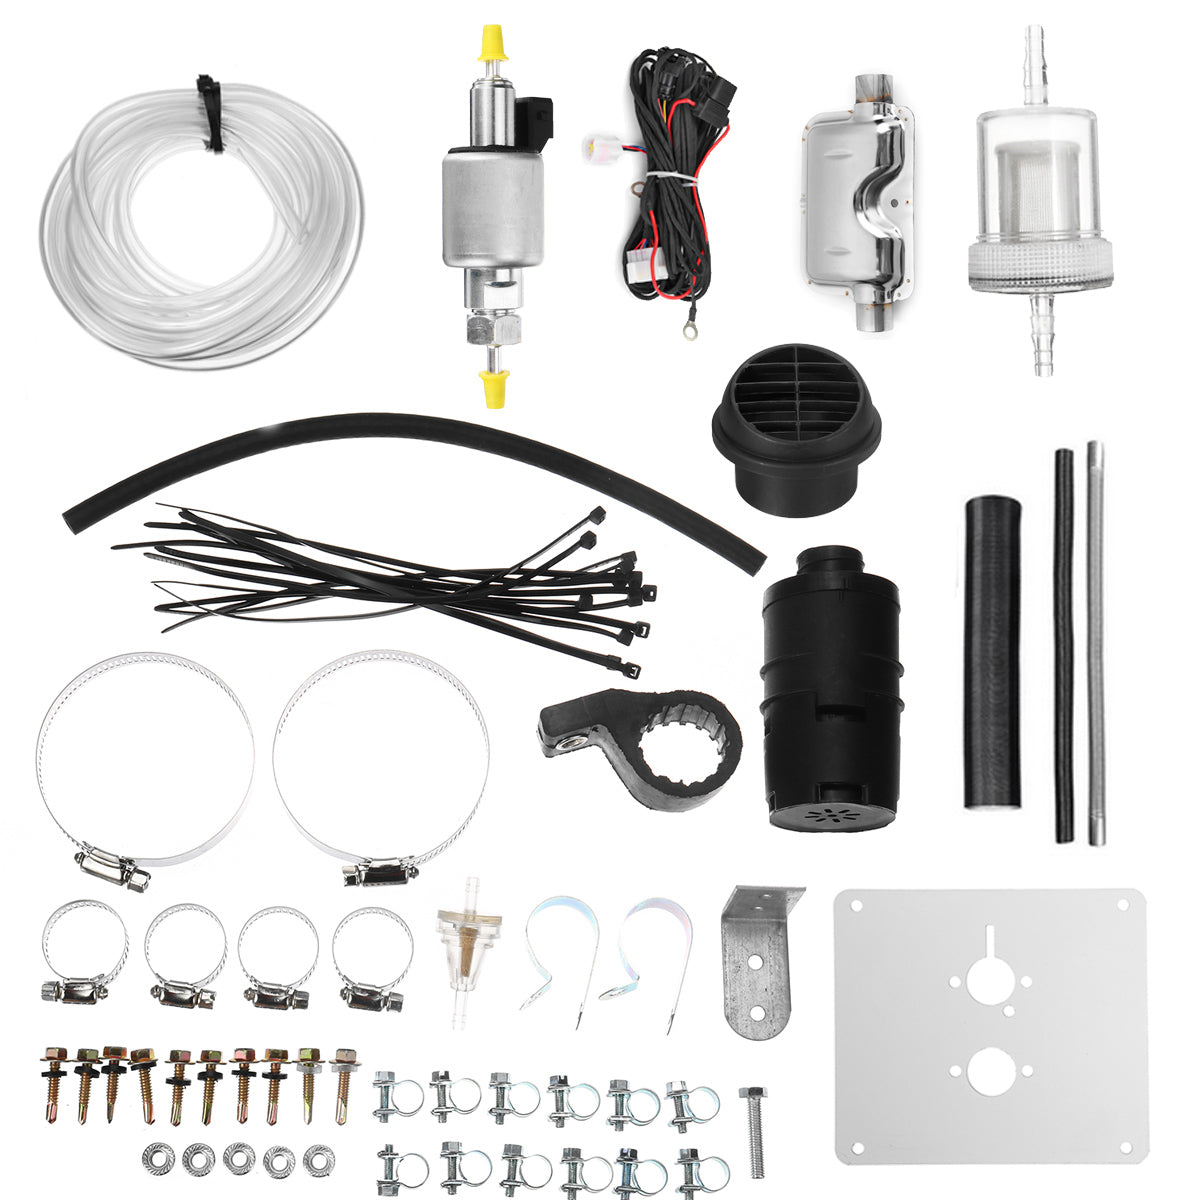 A12-Complete-Set-Accessories-front-1